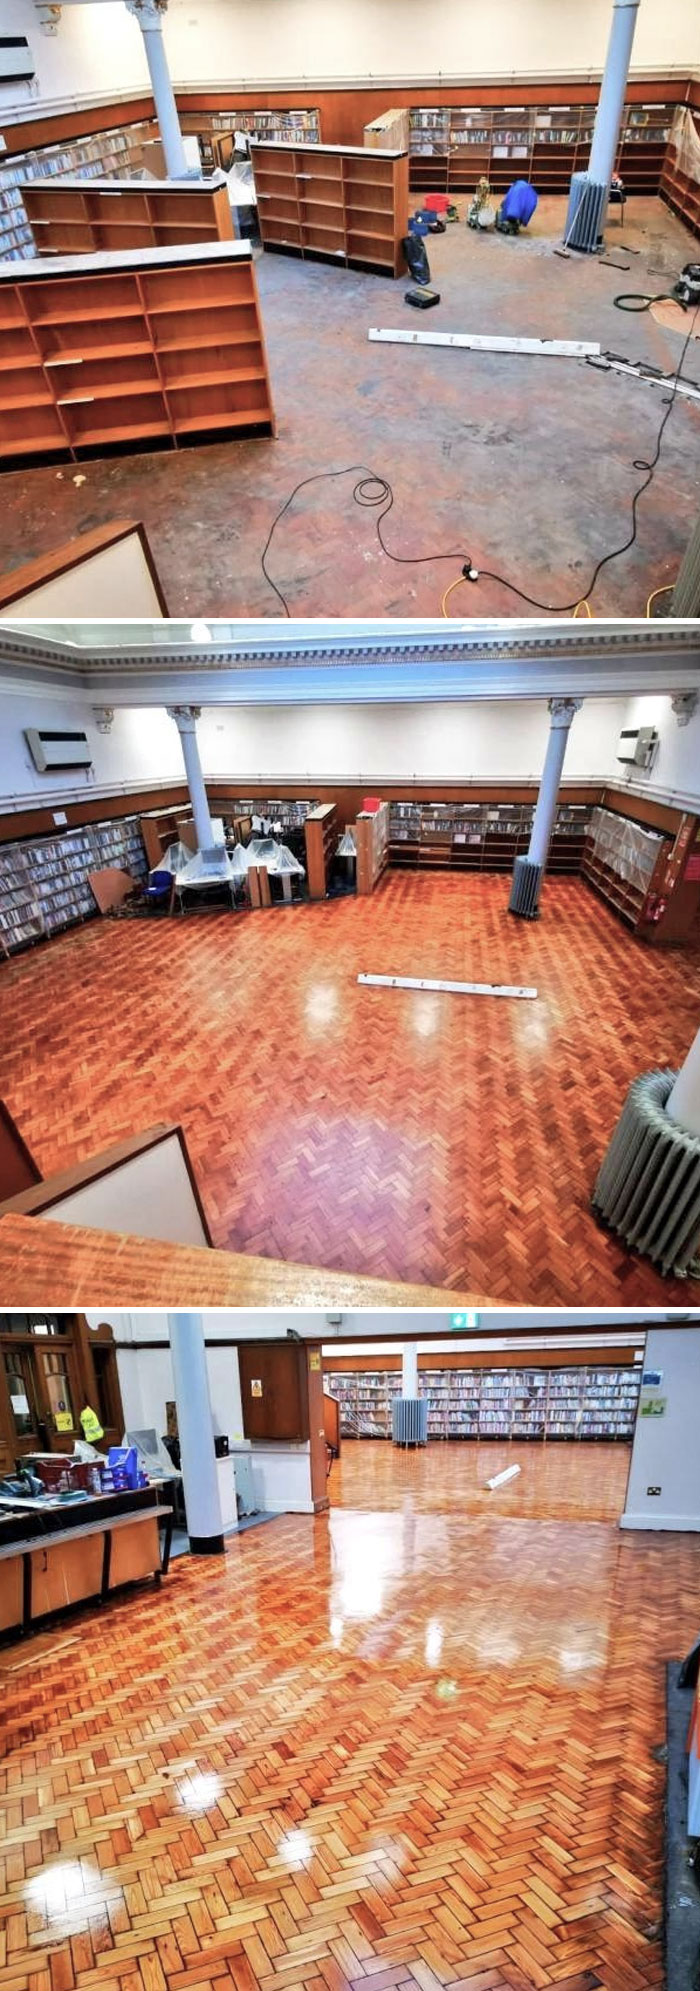 They Found A 117-Year-Old Wooden Parquet Floor Under The Carpet In A Glasgow Library